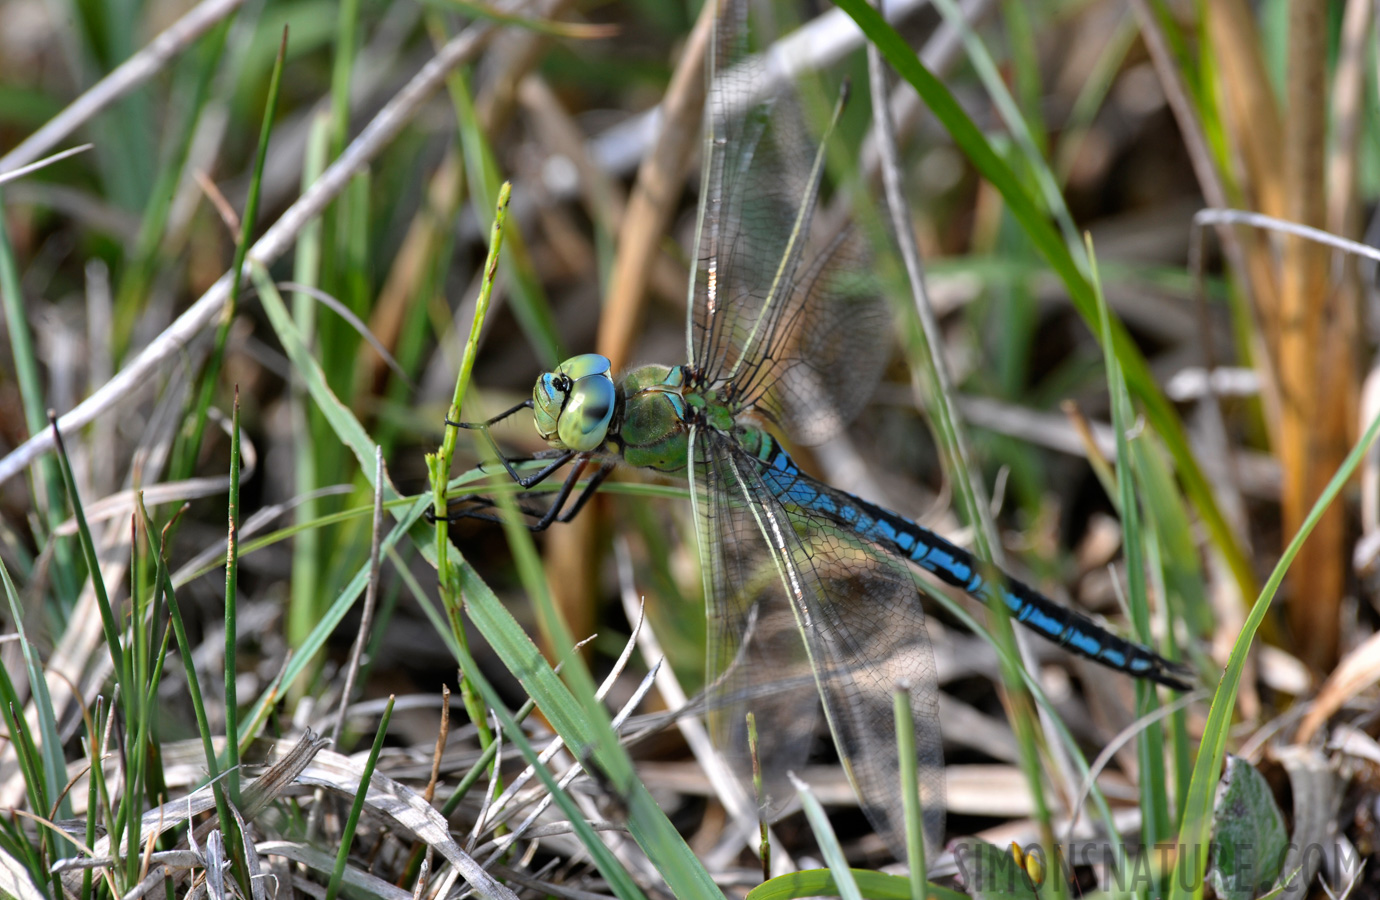 Anax imperator [550 mm, 1/125 Sek. bei f / 11, ISO 400]